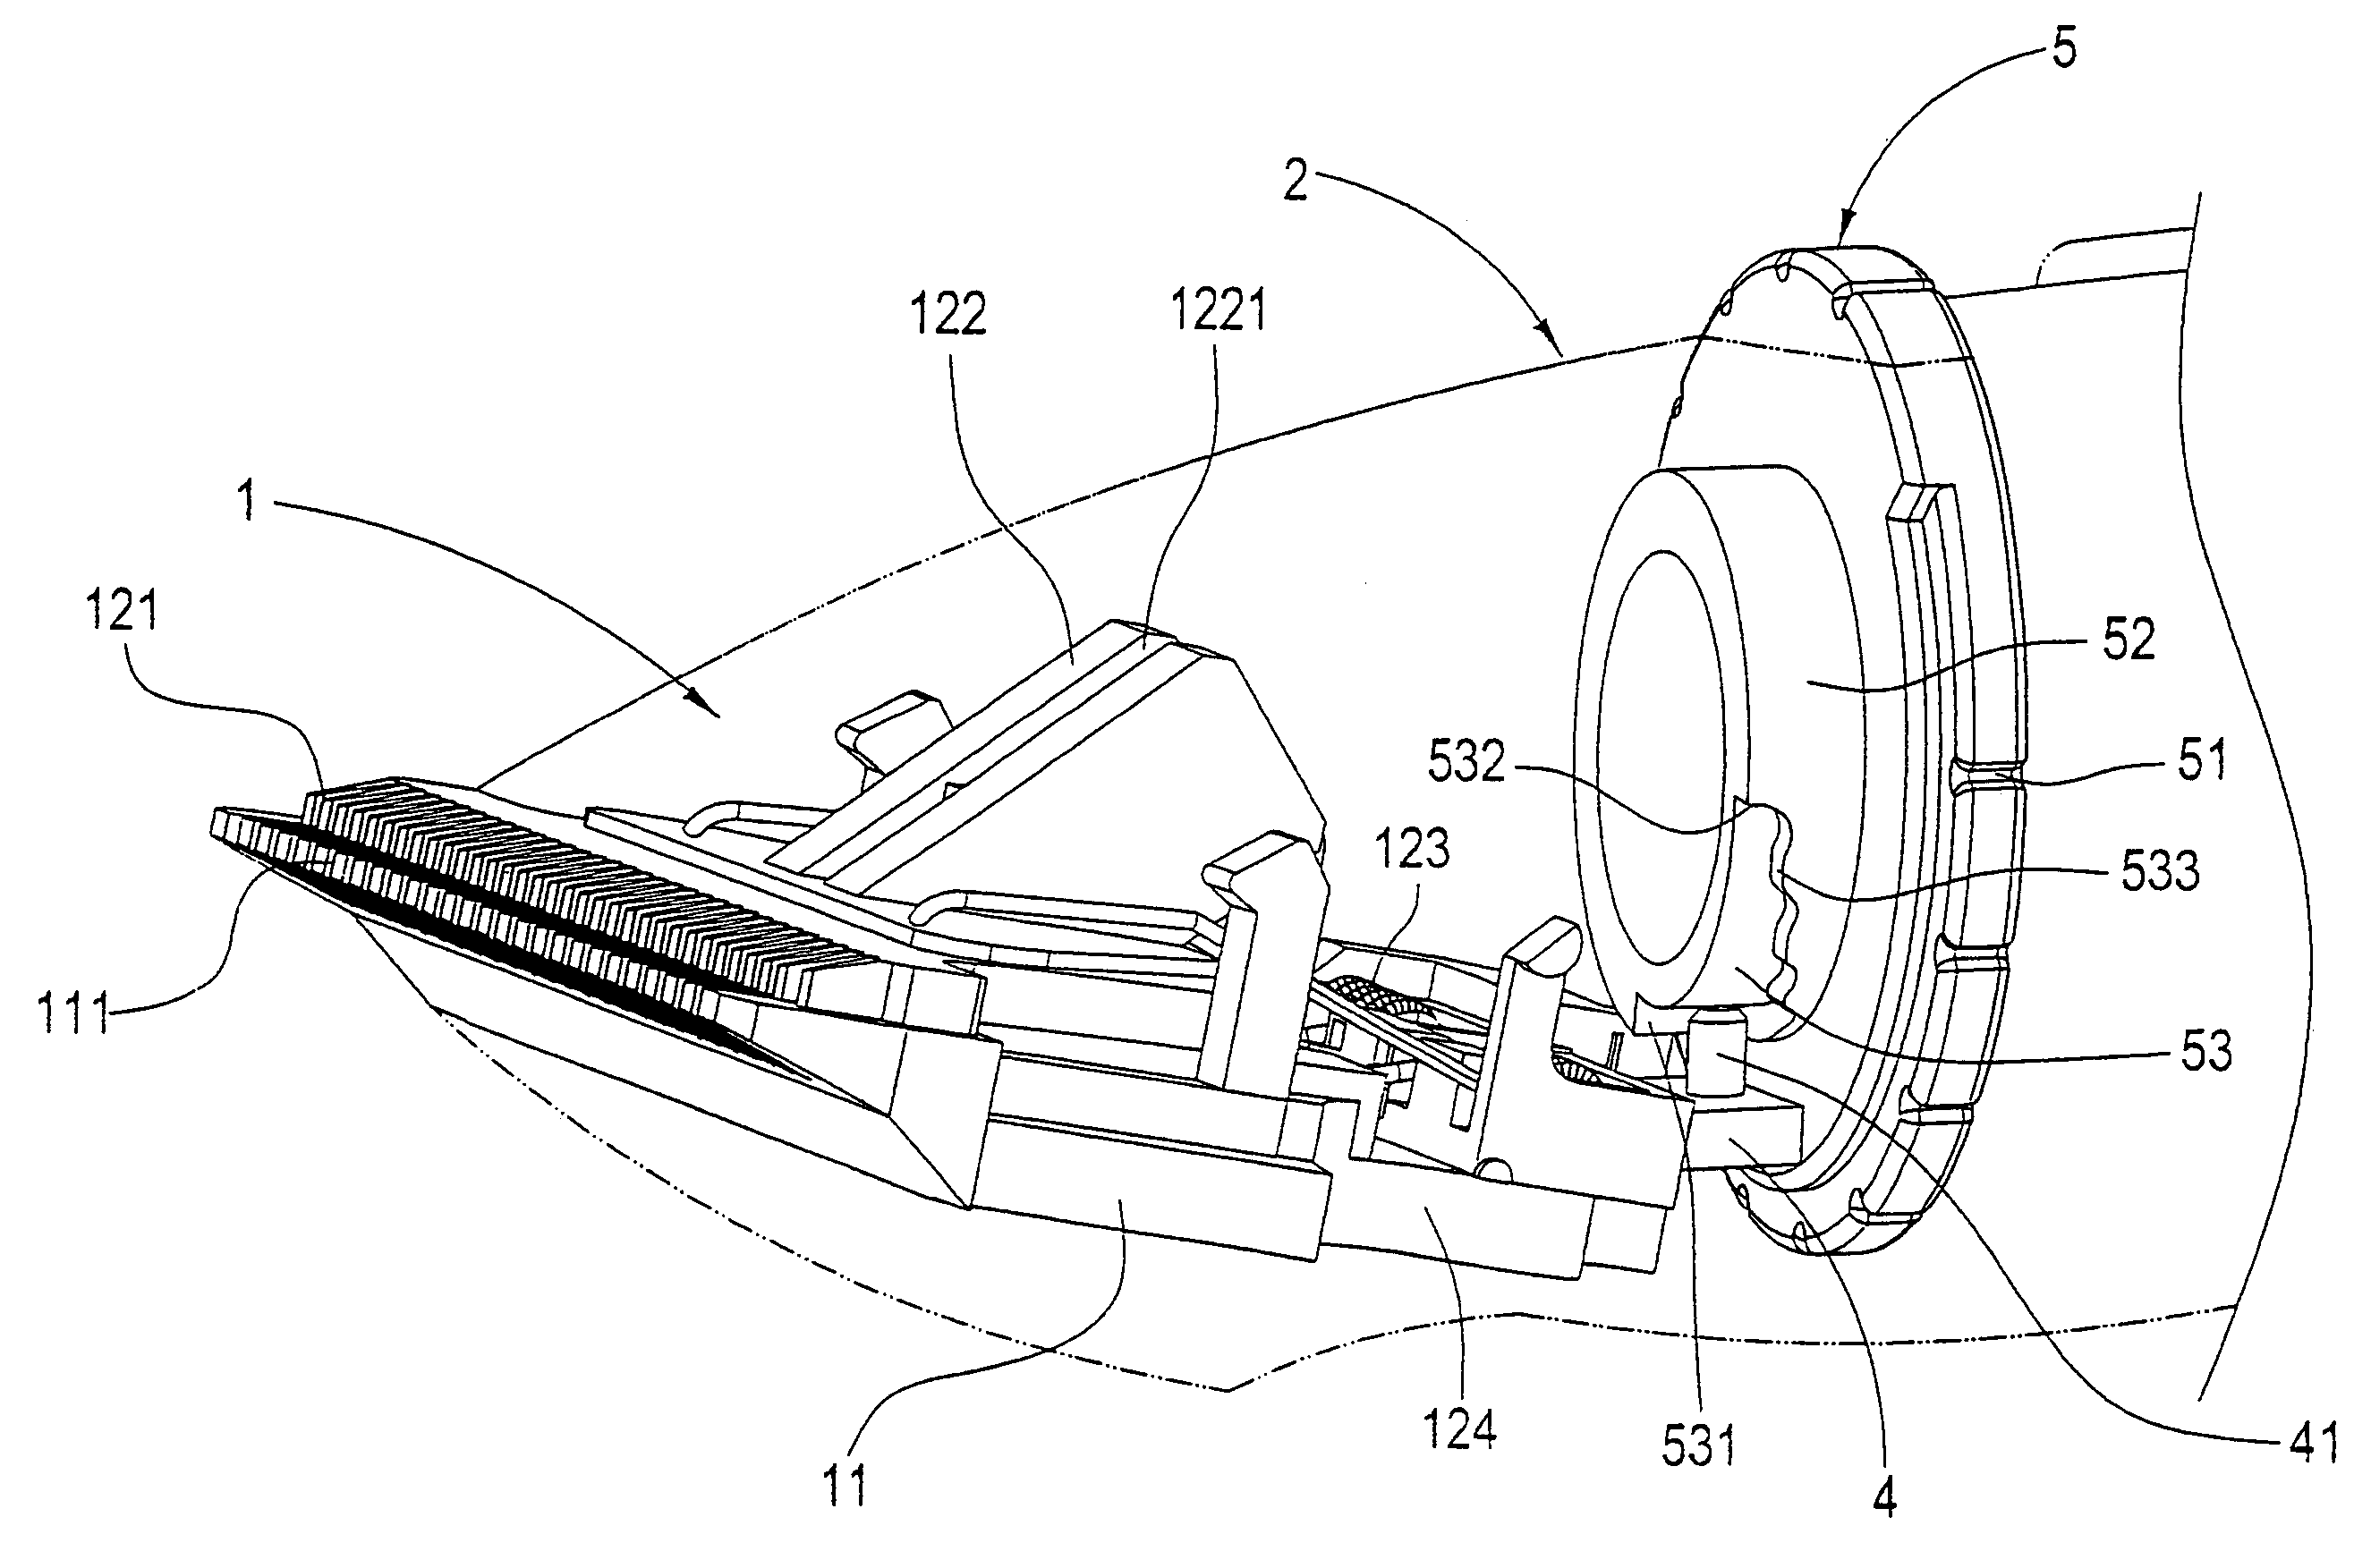 Adjustable apparatus for hair clipper